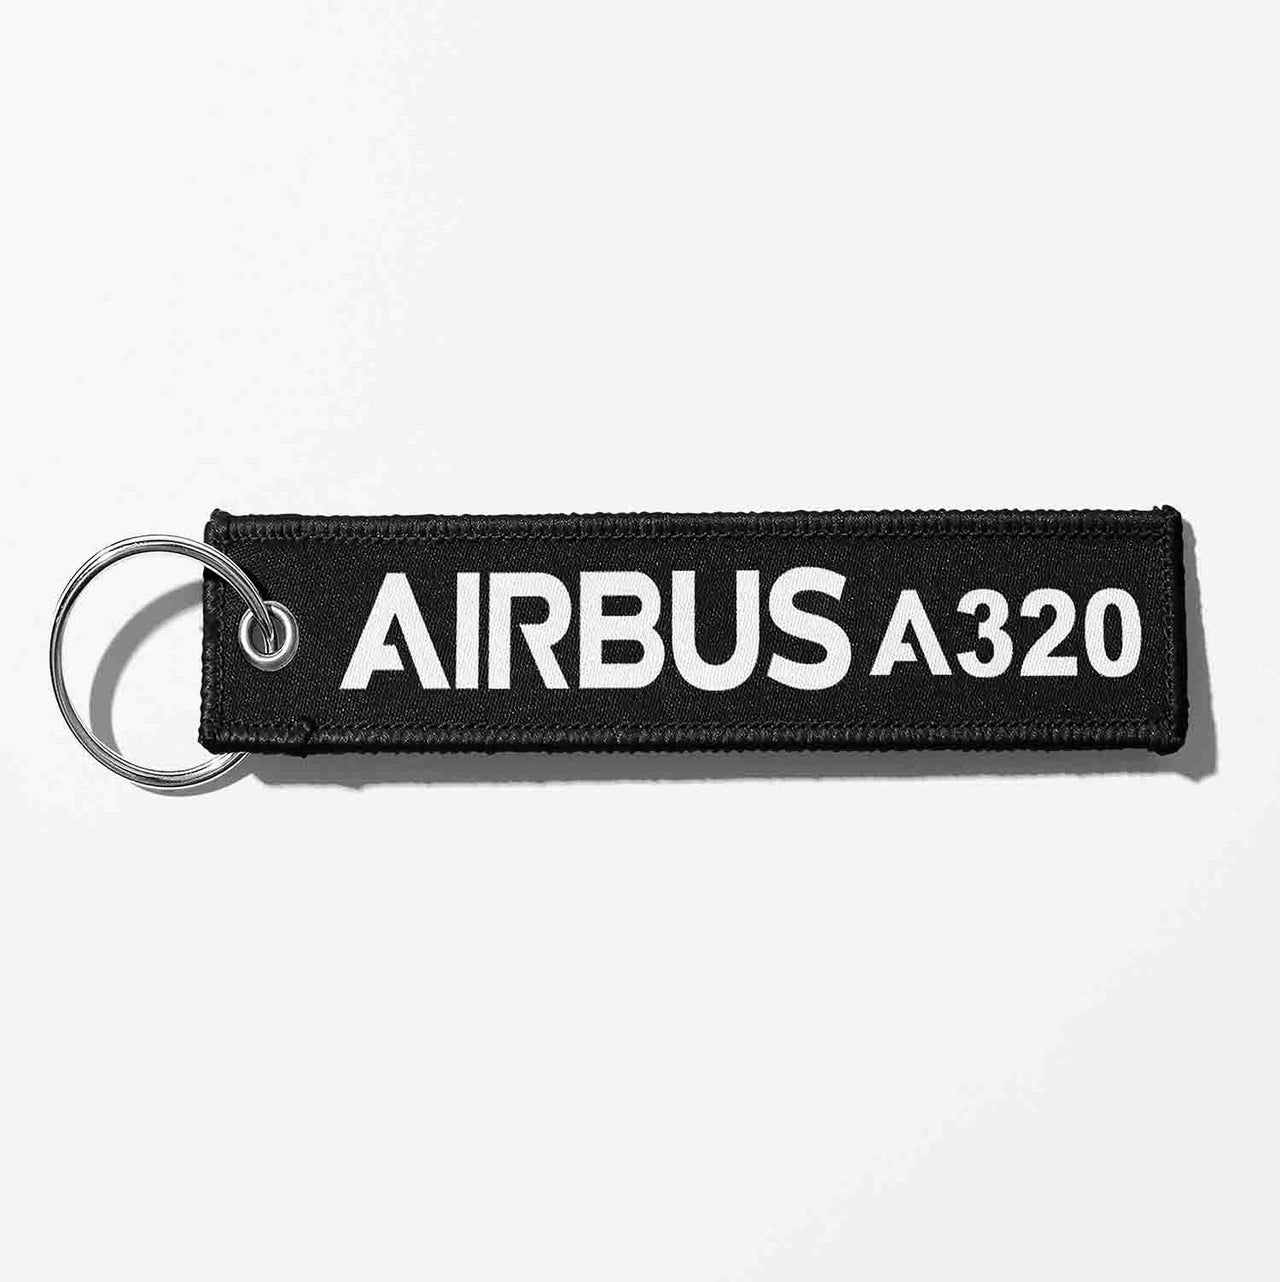 Airbus A320 & Text Designed Key Chains